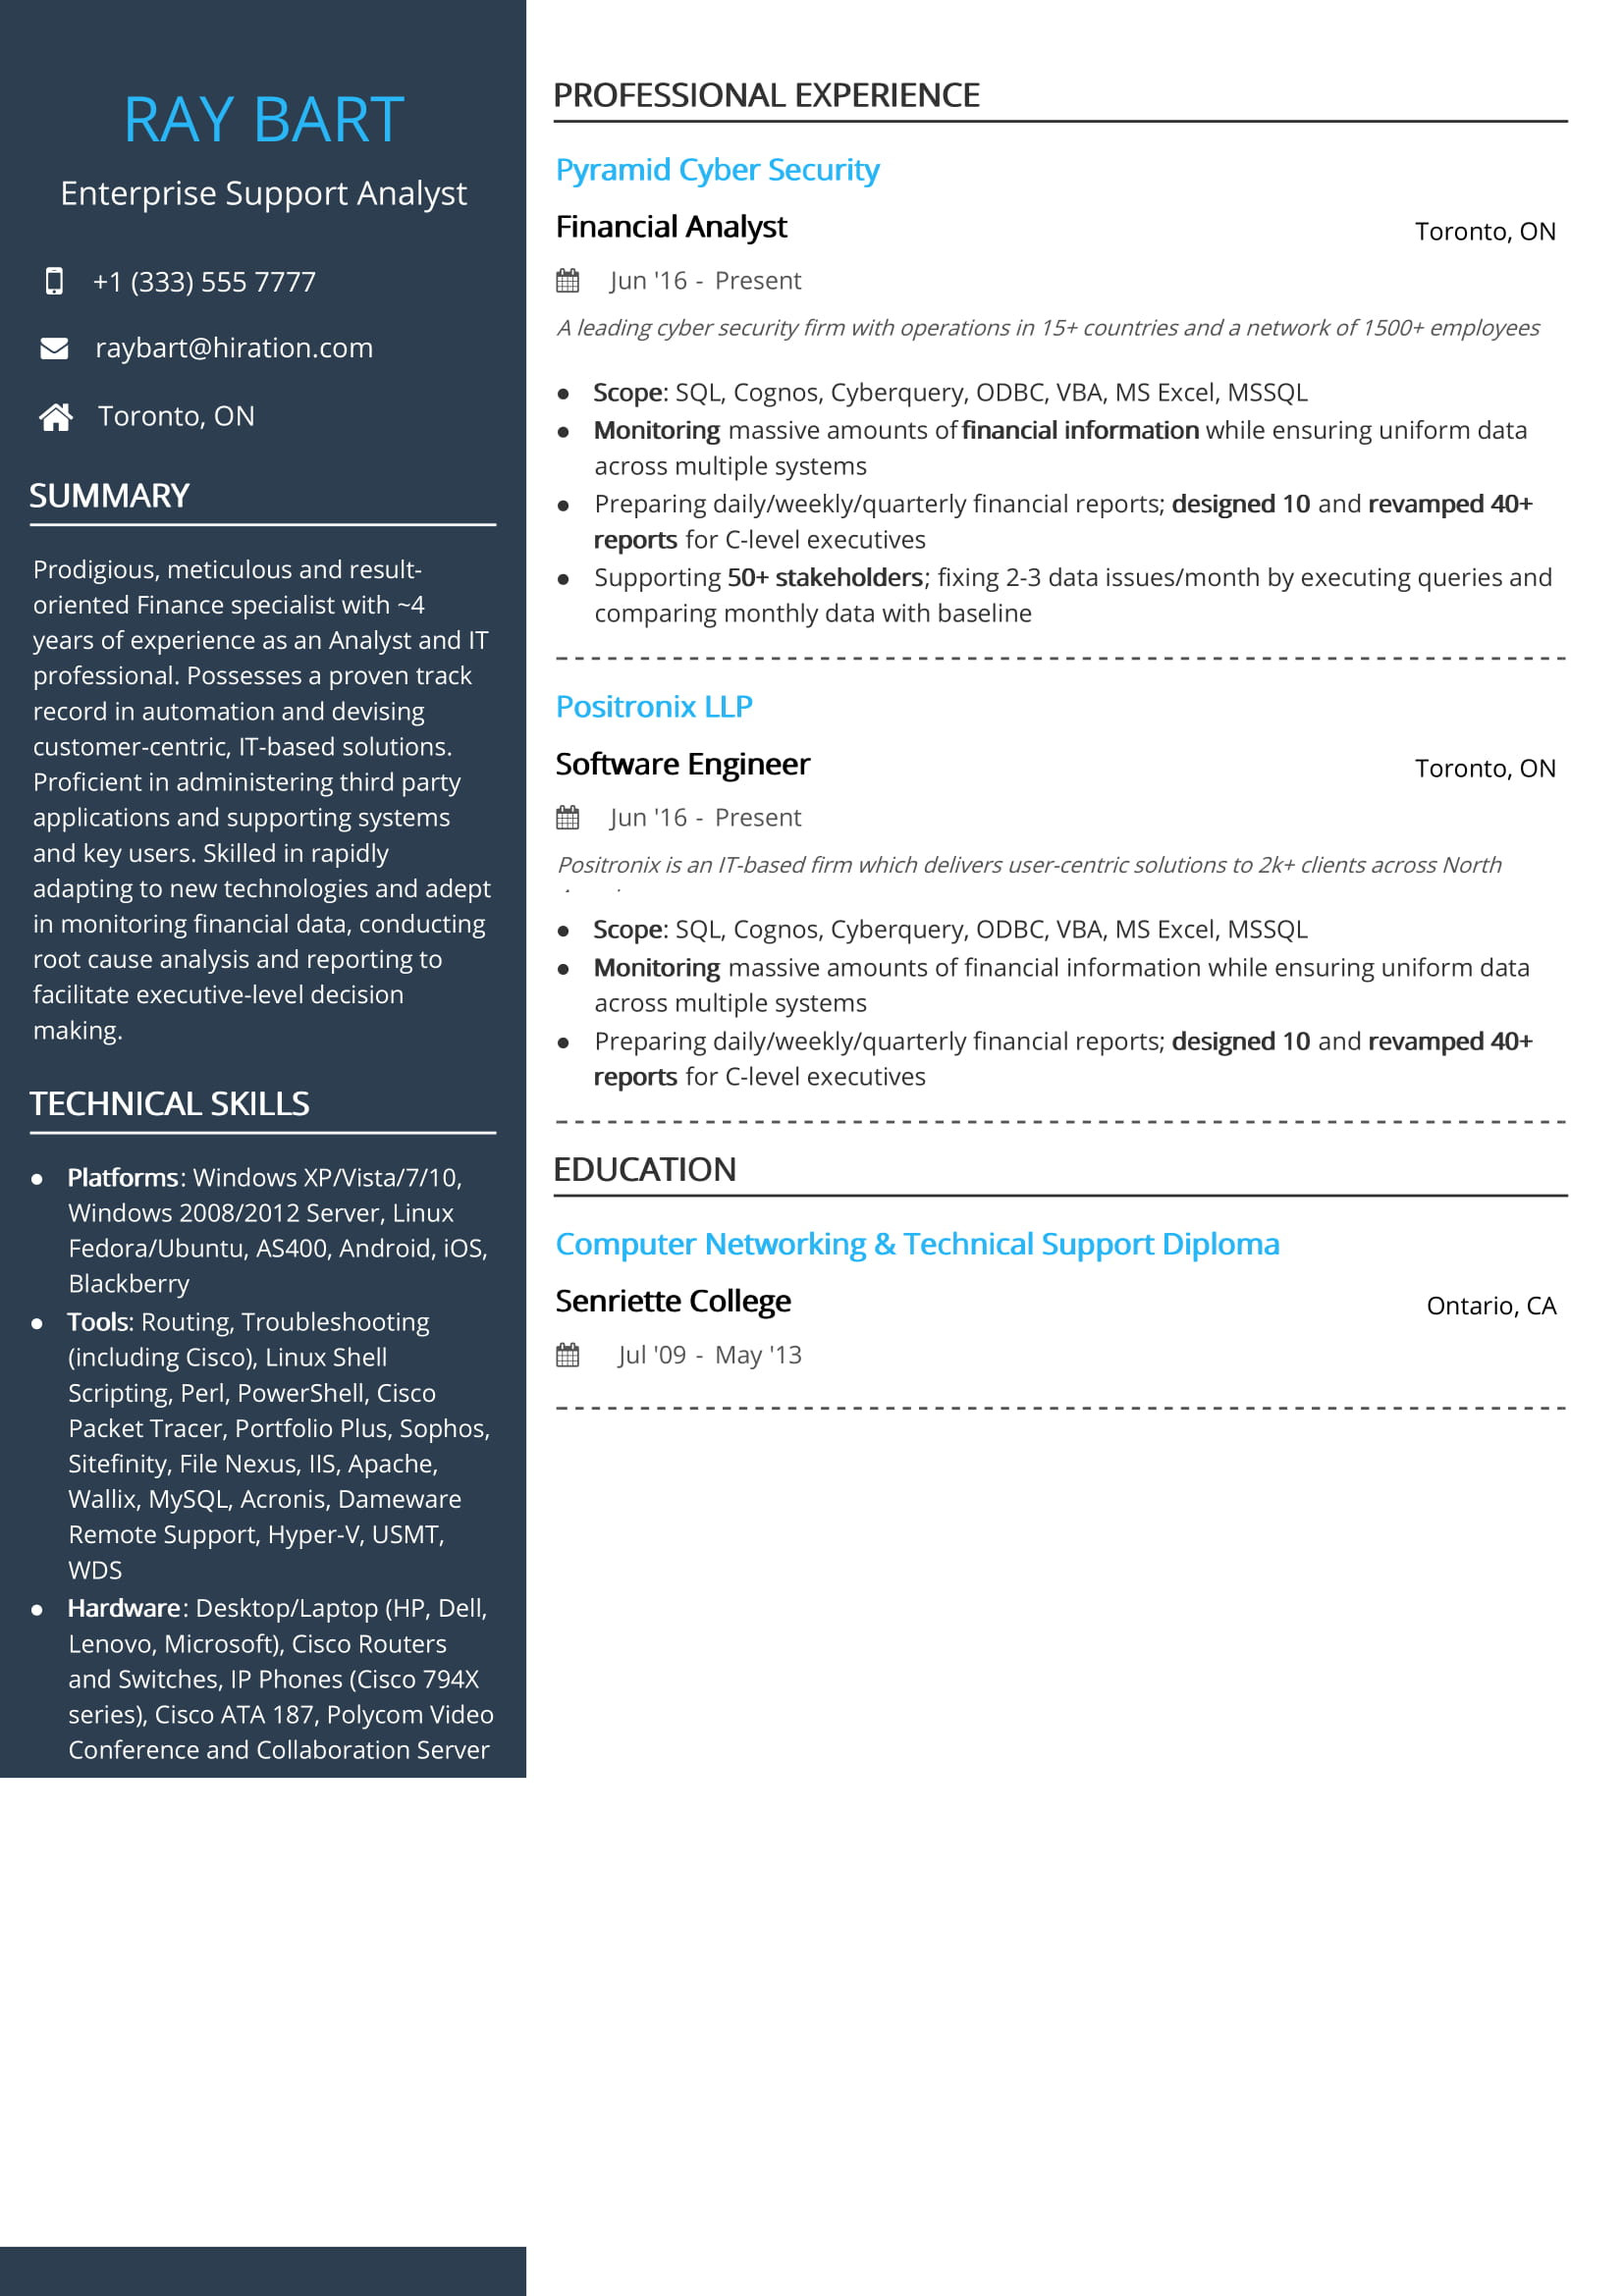 Lead It Support Analyst Resume Samples Technology Resume Examples & Resume Samples [2020]